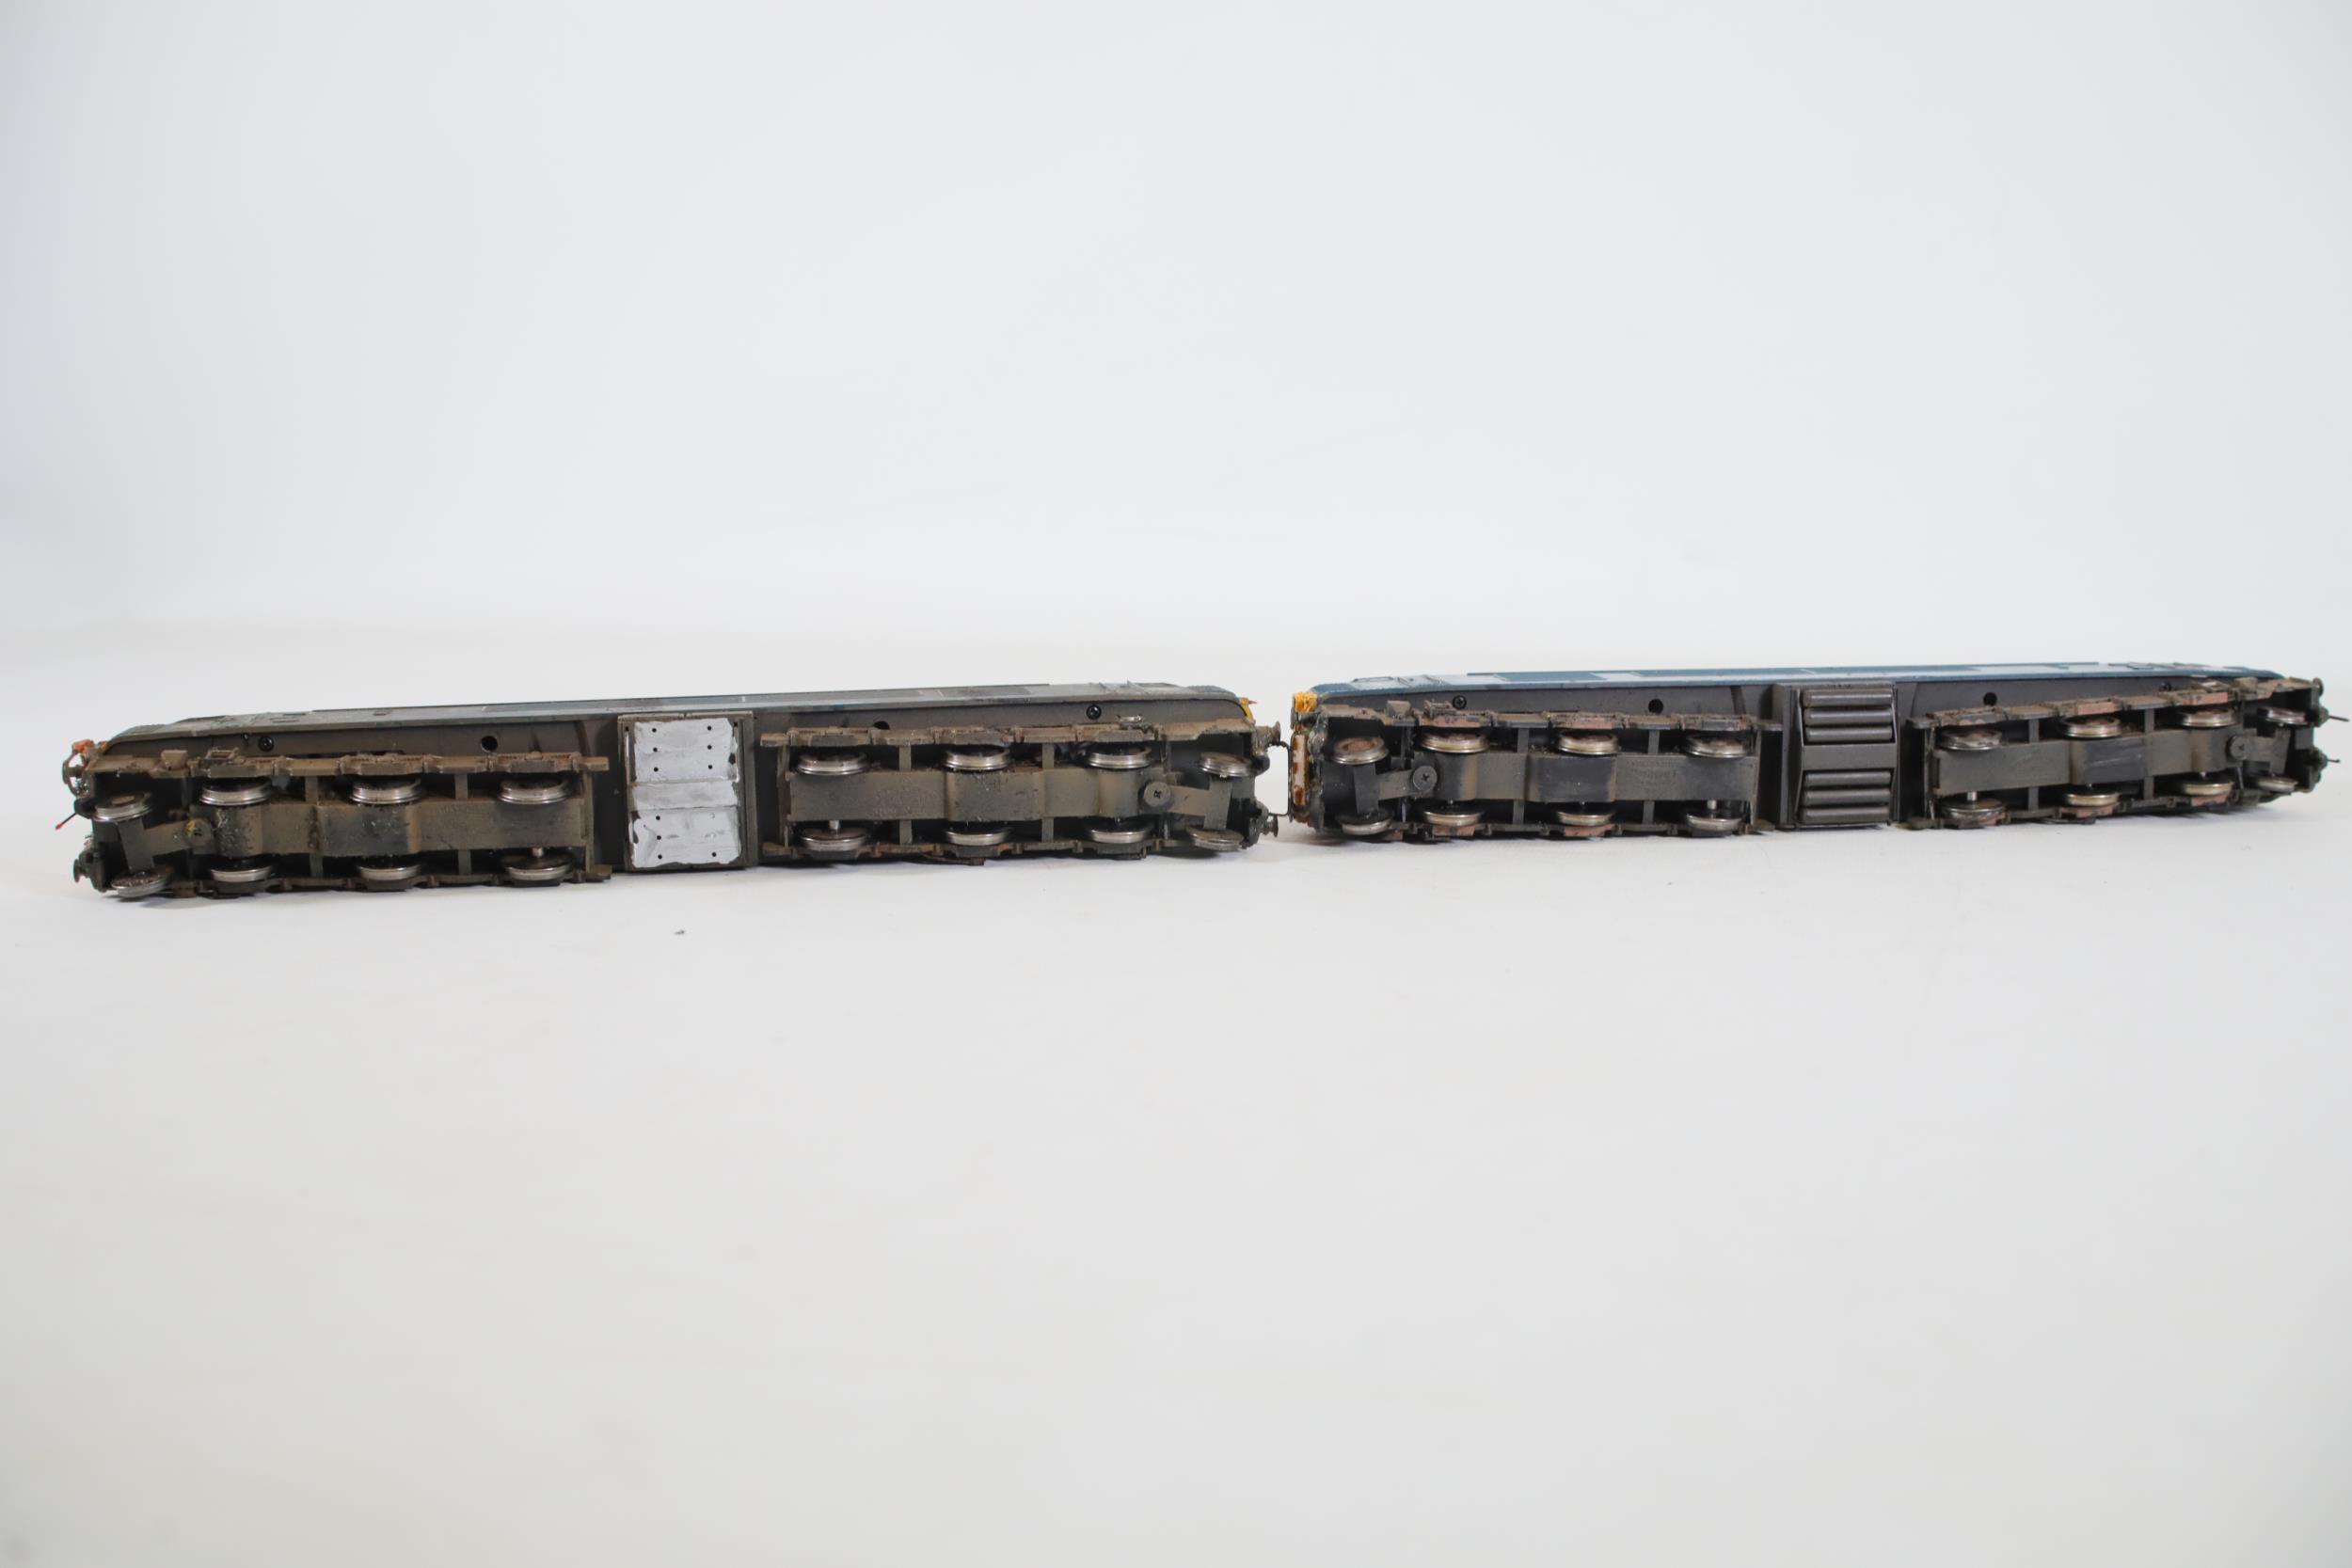 2 Bachmann OO Gauge Locomotives Br Blue Class 45 45120 and 45005 - Image 8 of 8